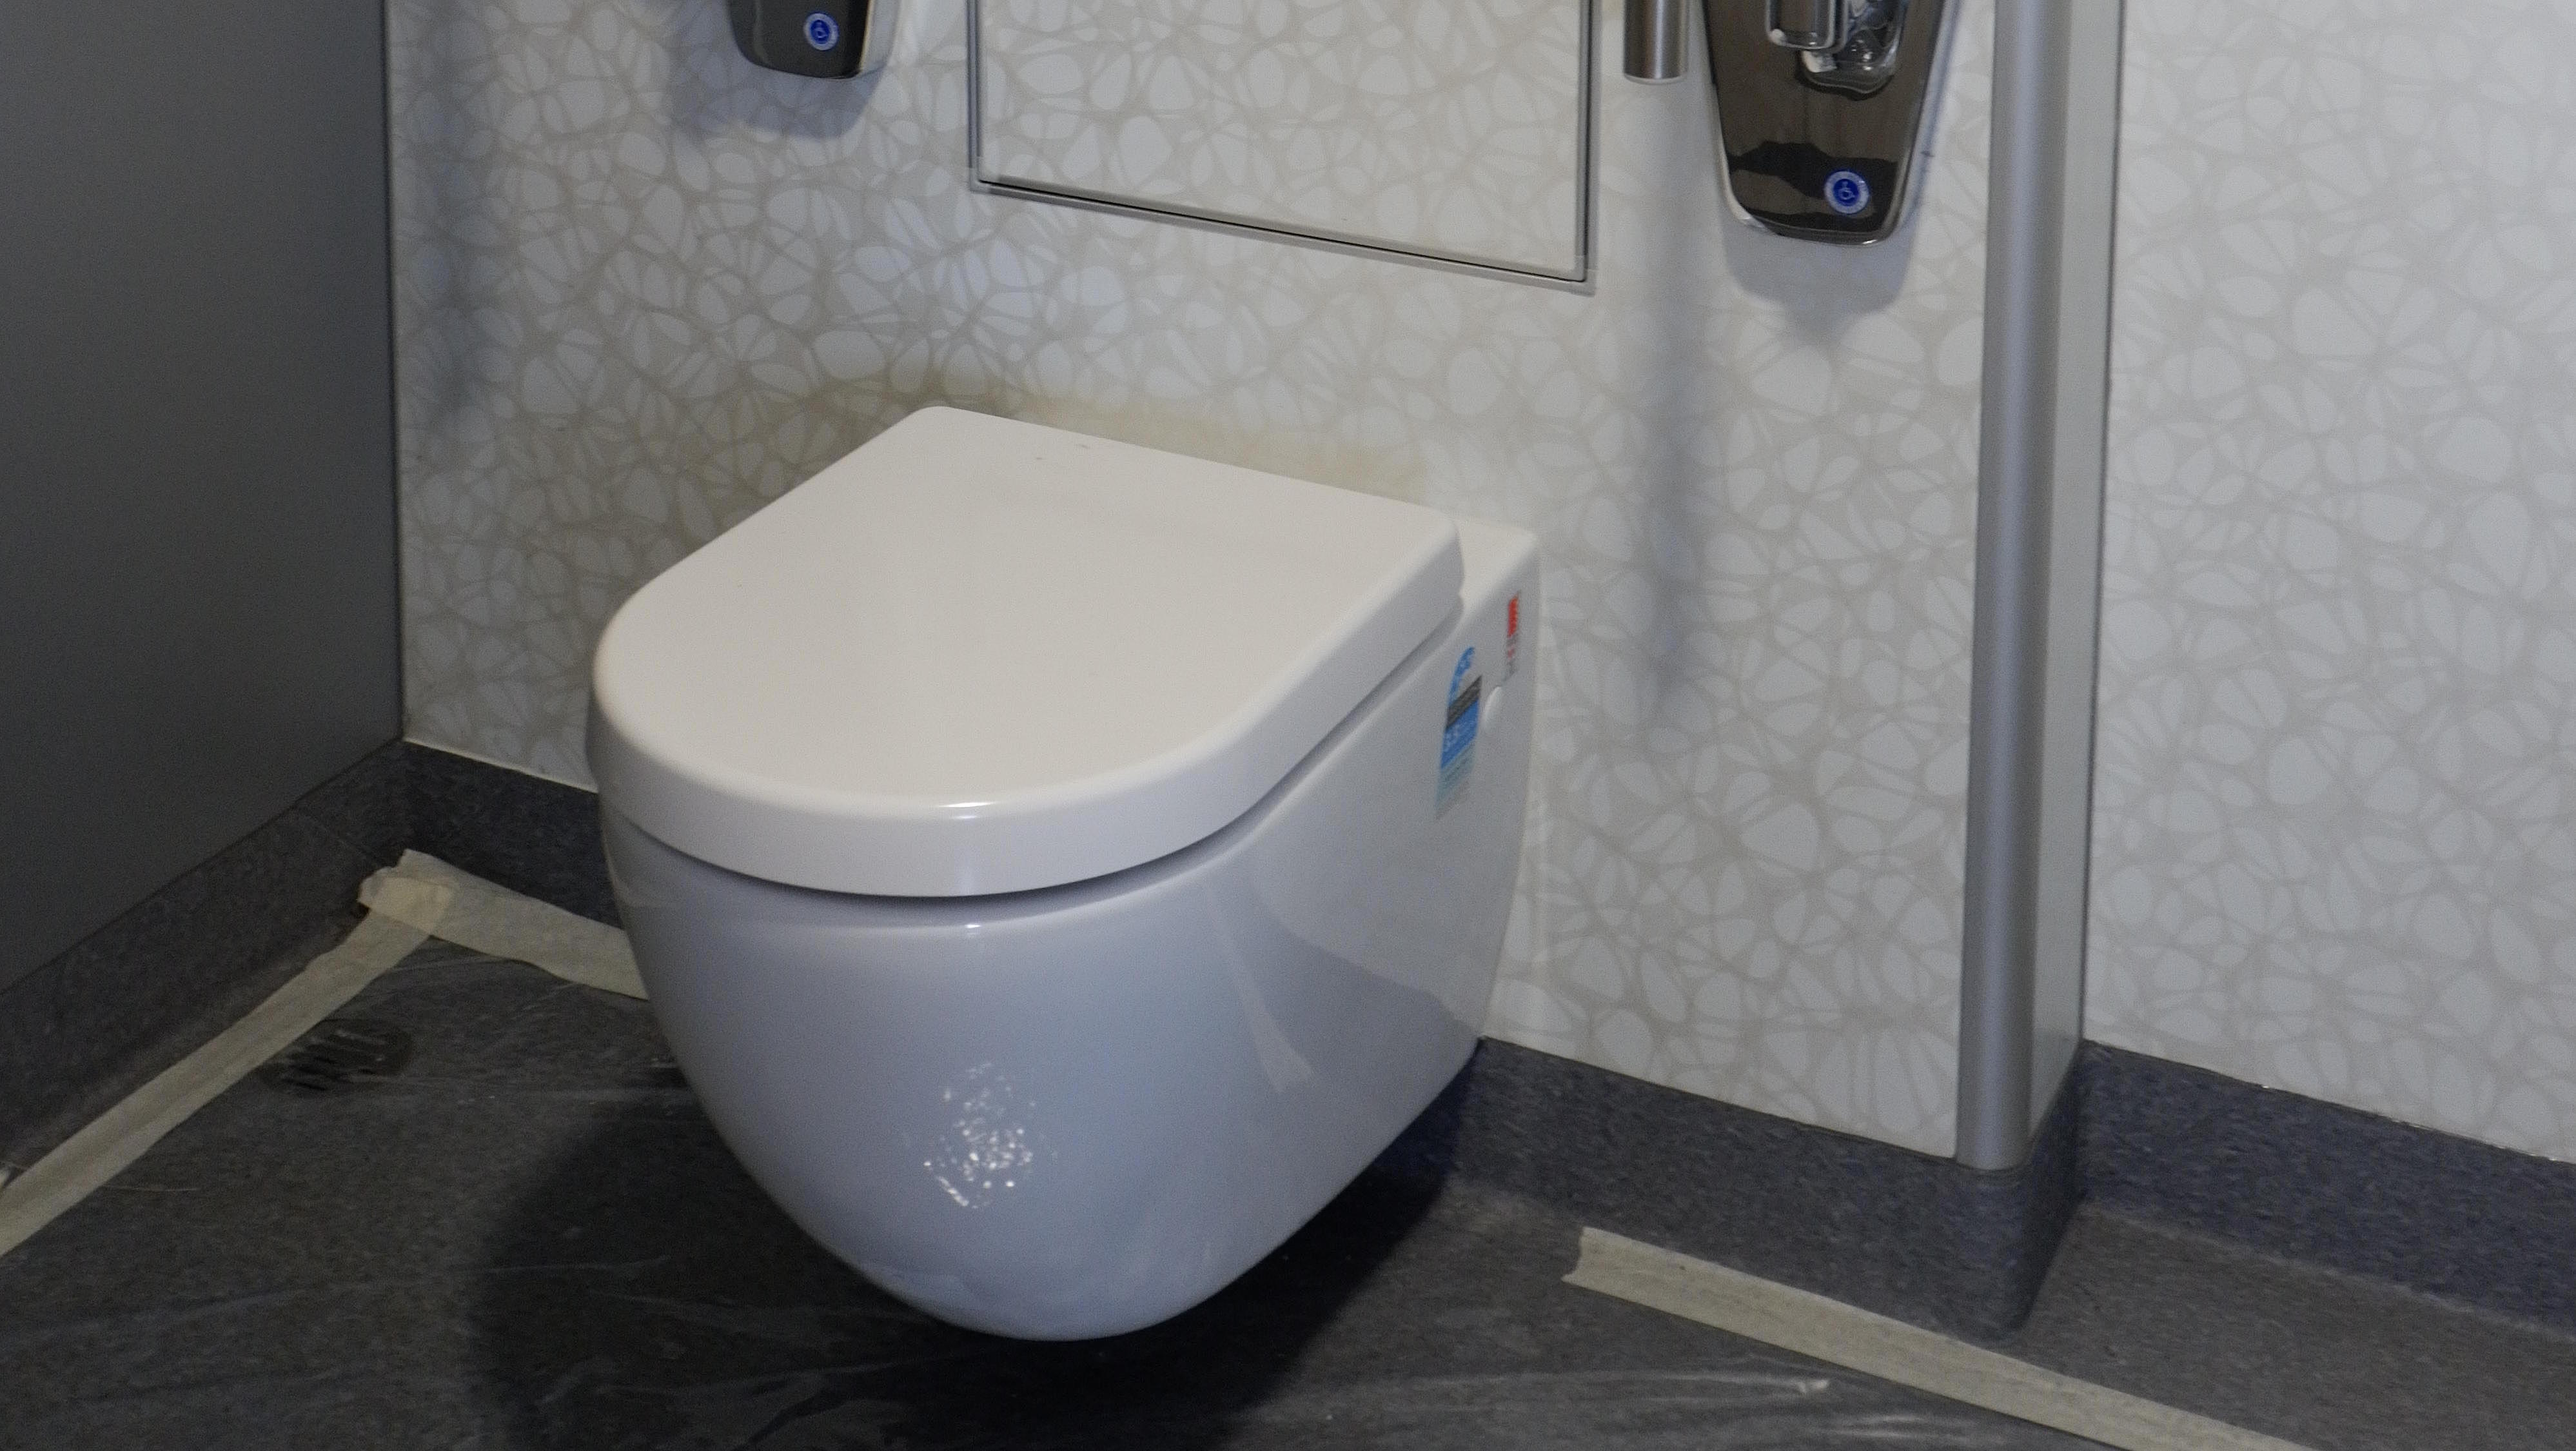 Halunder Jet and its toilet for disabled people.